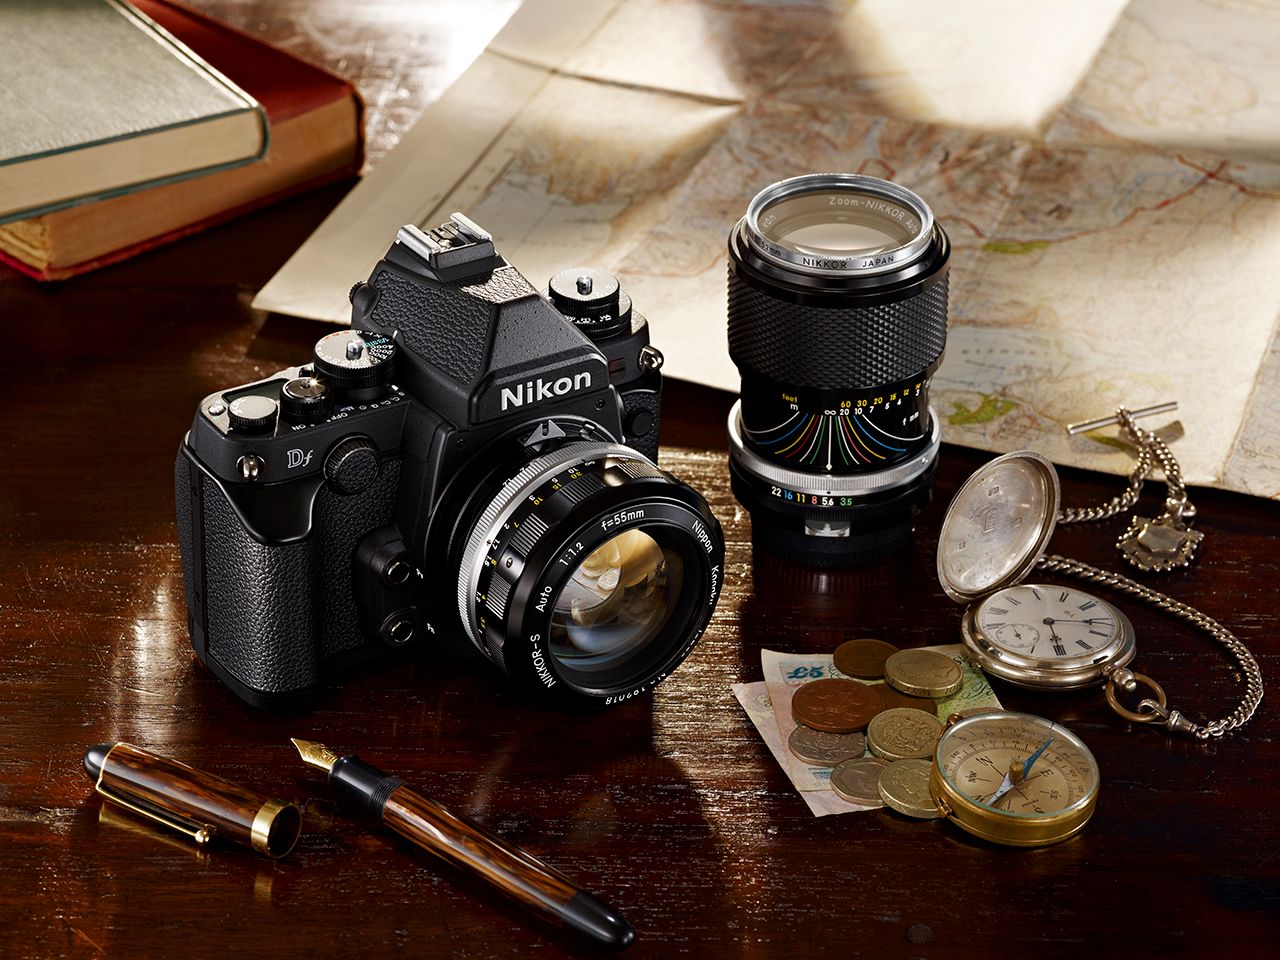 nikon df official the retro style dslr like a d4 from the past complete with non ai lens compatibility image 1